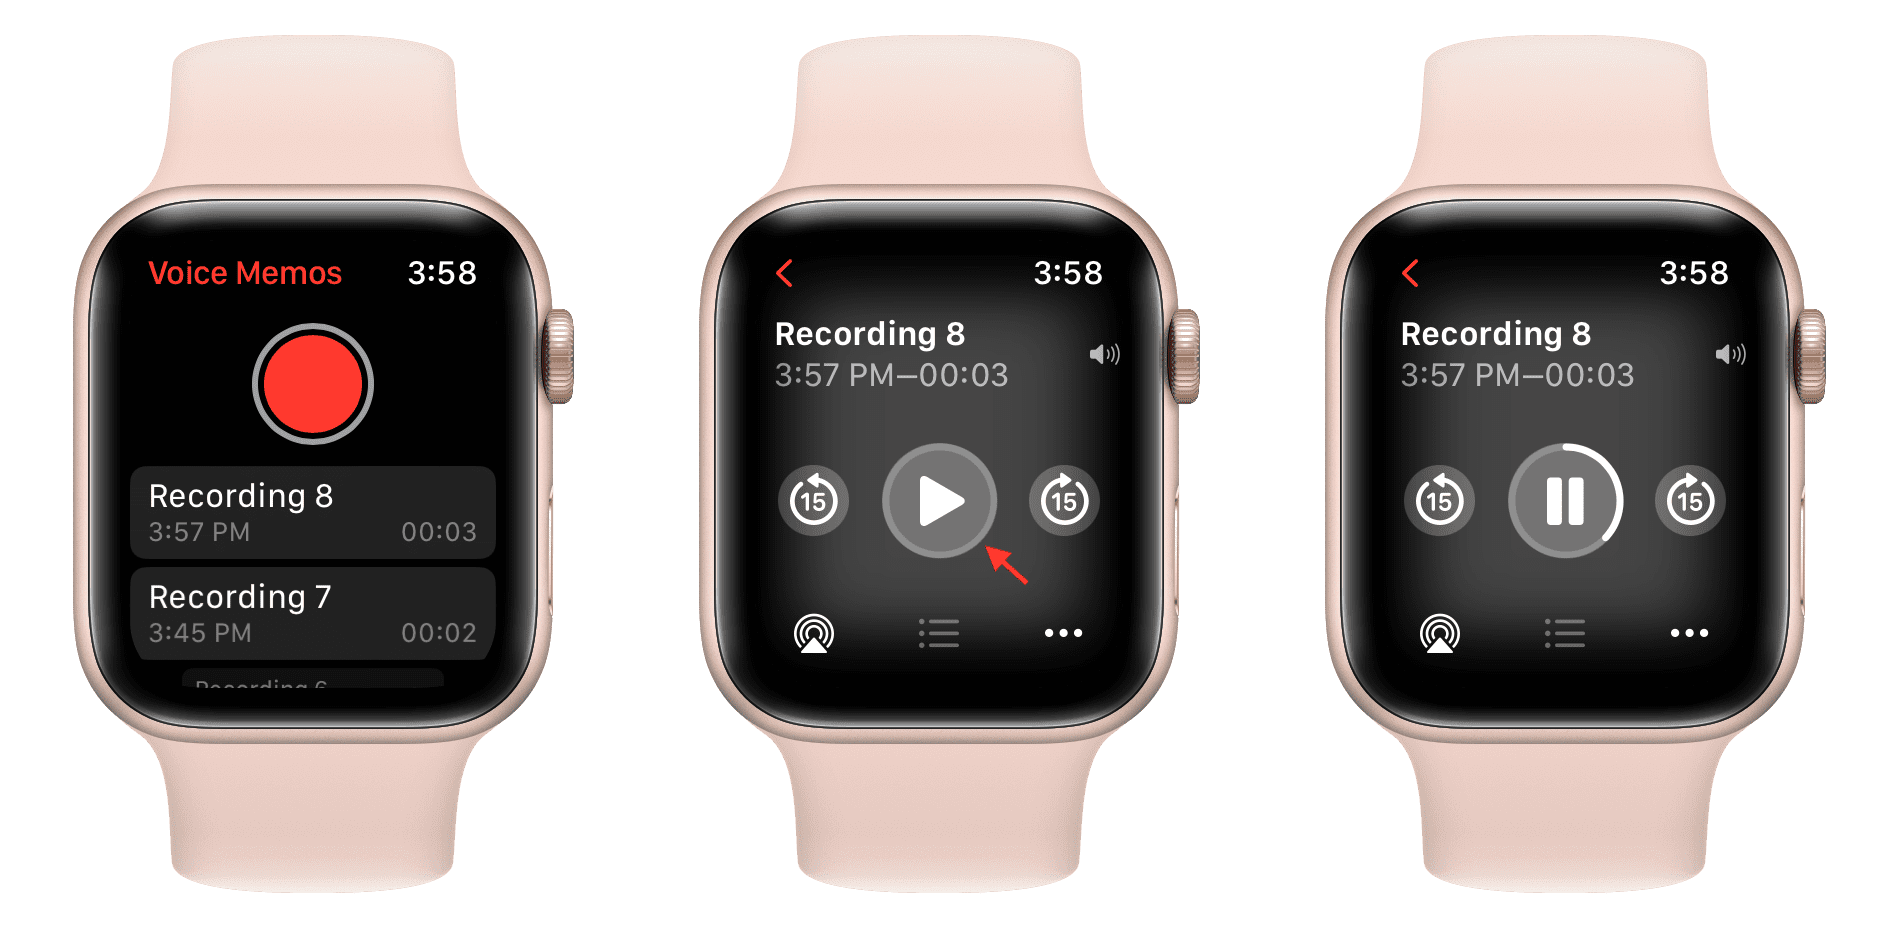 Play recorded voice note on Apple Watch